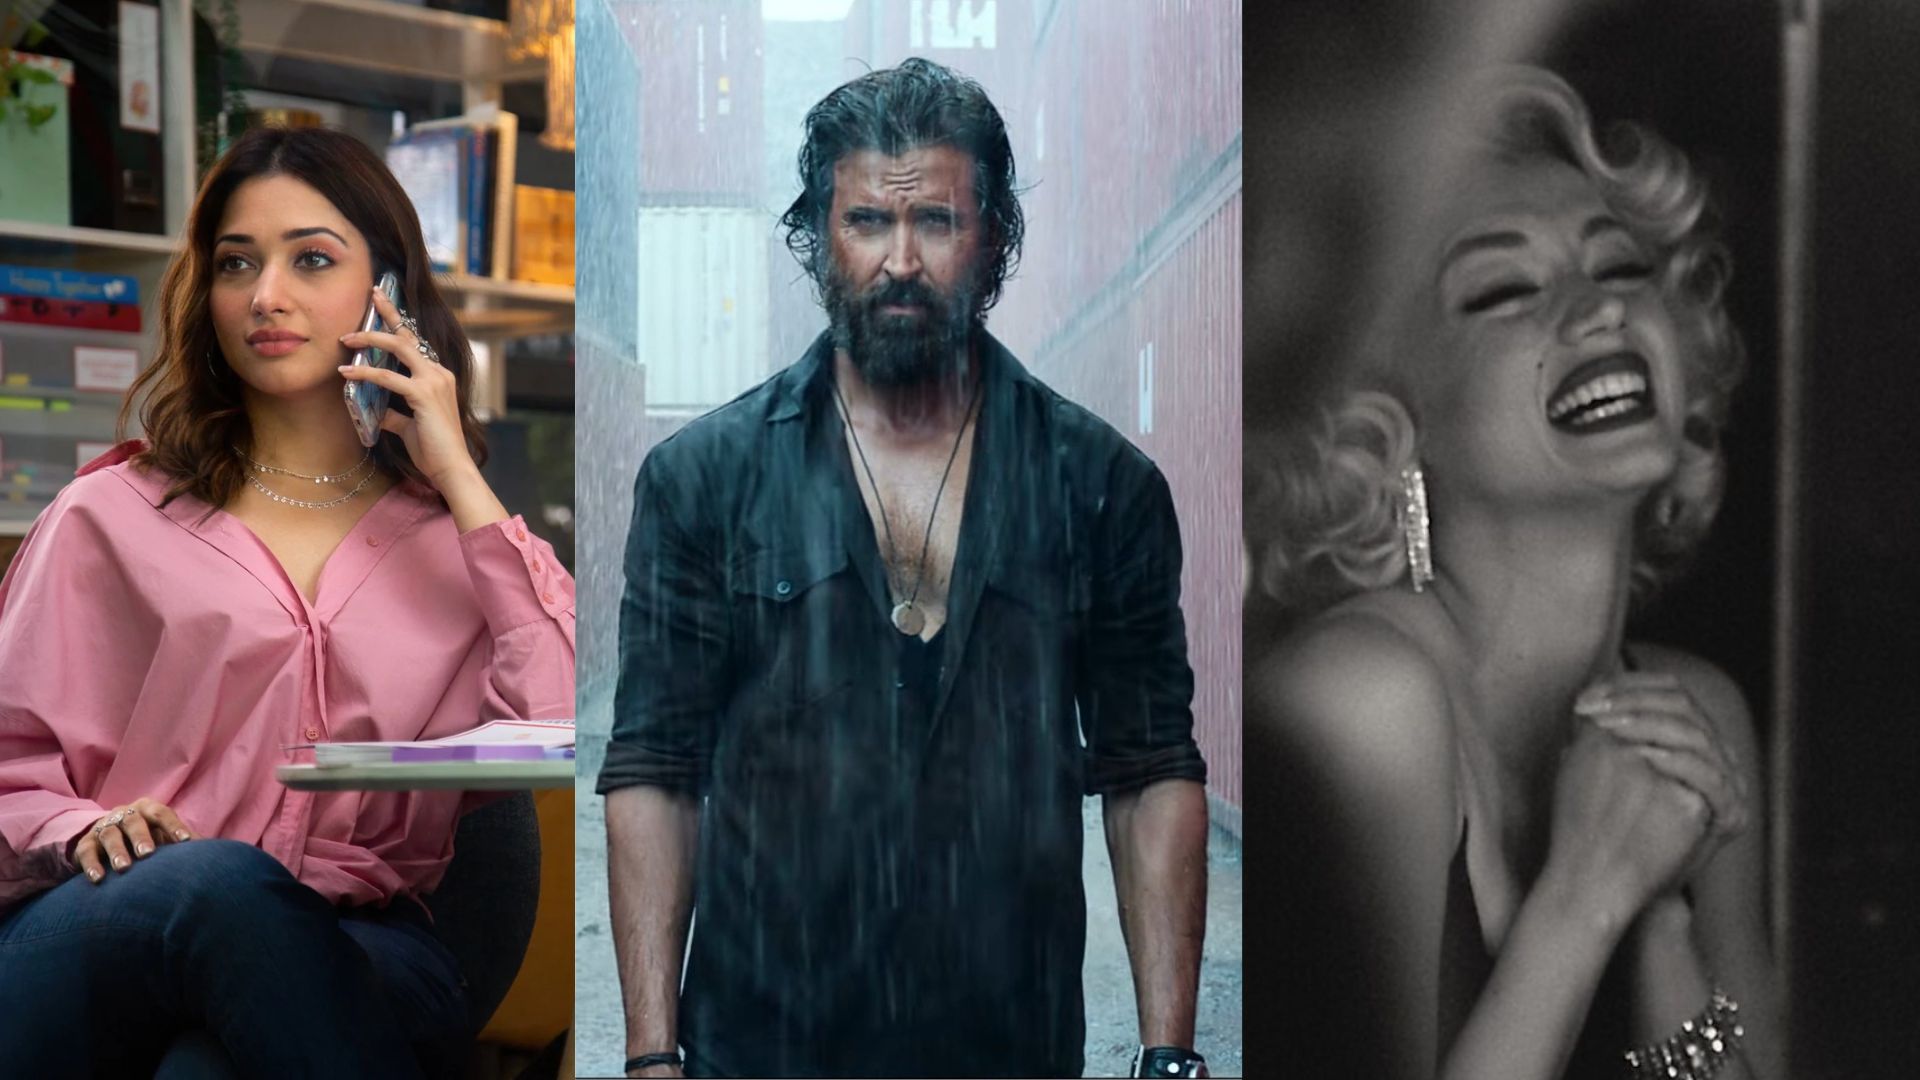 What To Watch This Week Of September 26 To October 2nd: ‘Vikram Vedha’, ‘Blonde’, Plan A Plan B’, And More